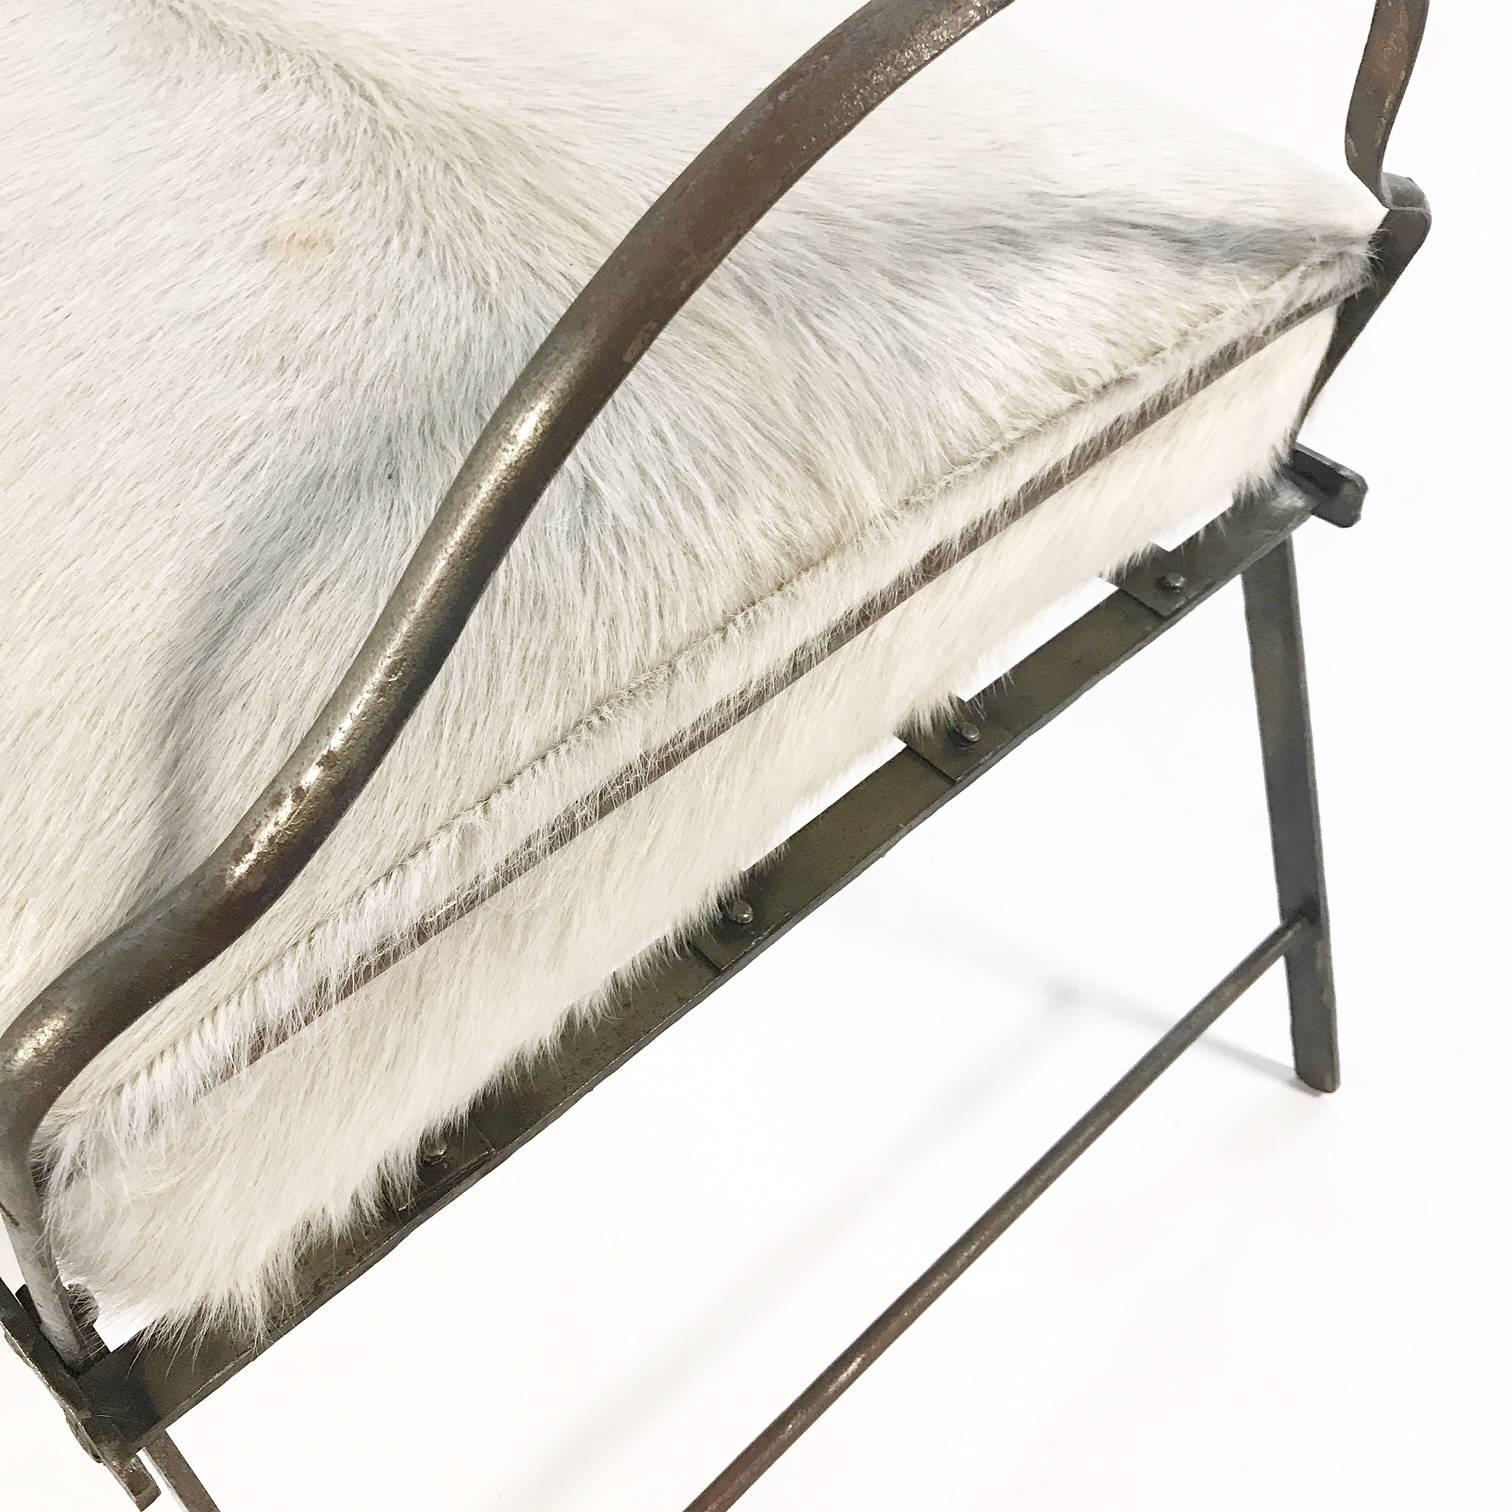 Antique French Metal Campaign Chaise Chair with Custom Brazilian Cowhide Cushion For Sale 2